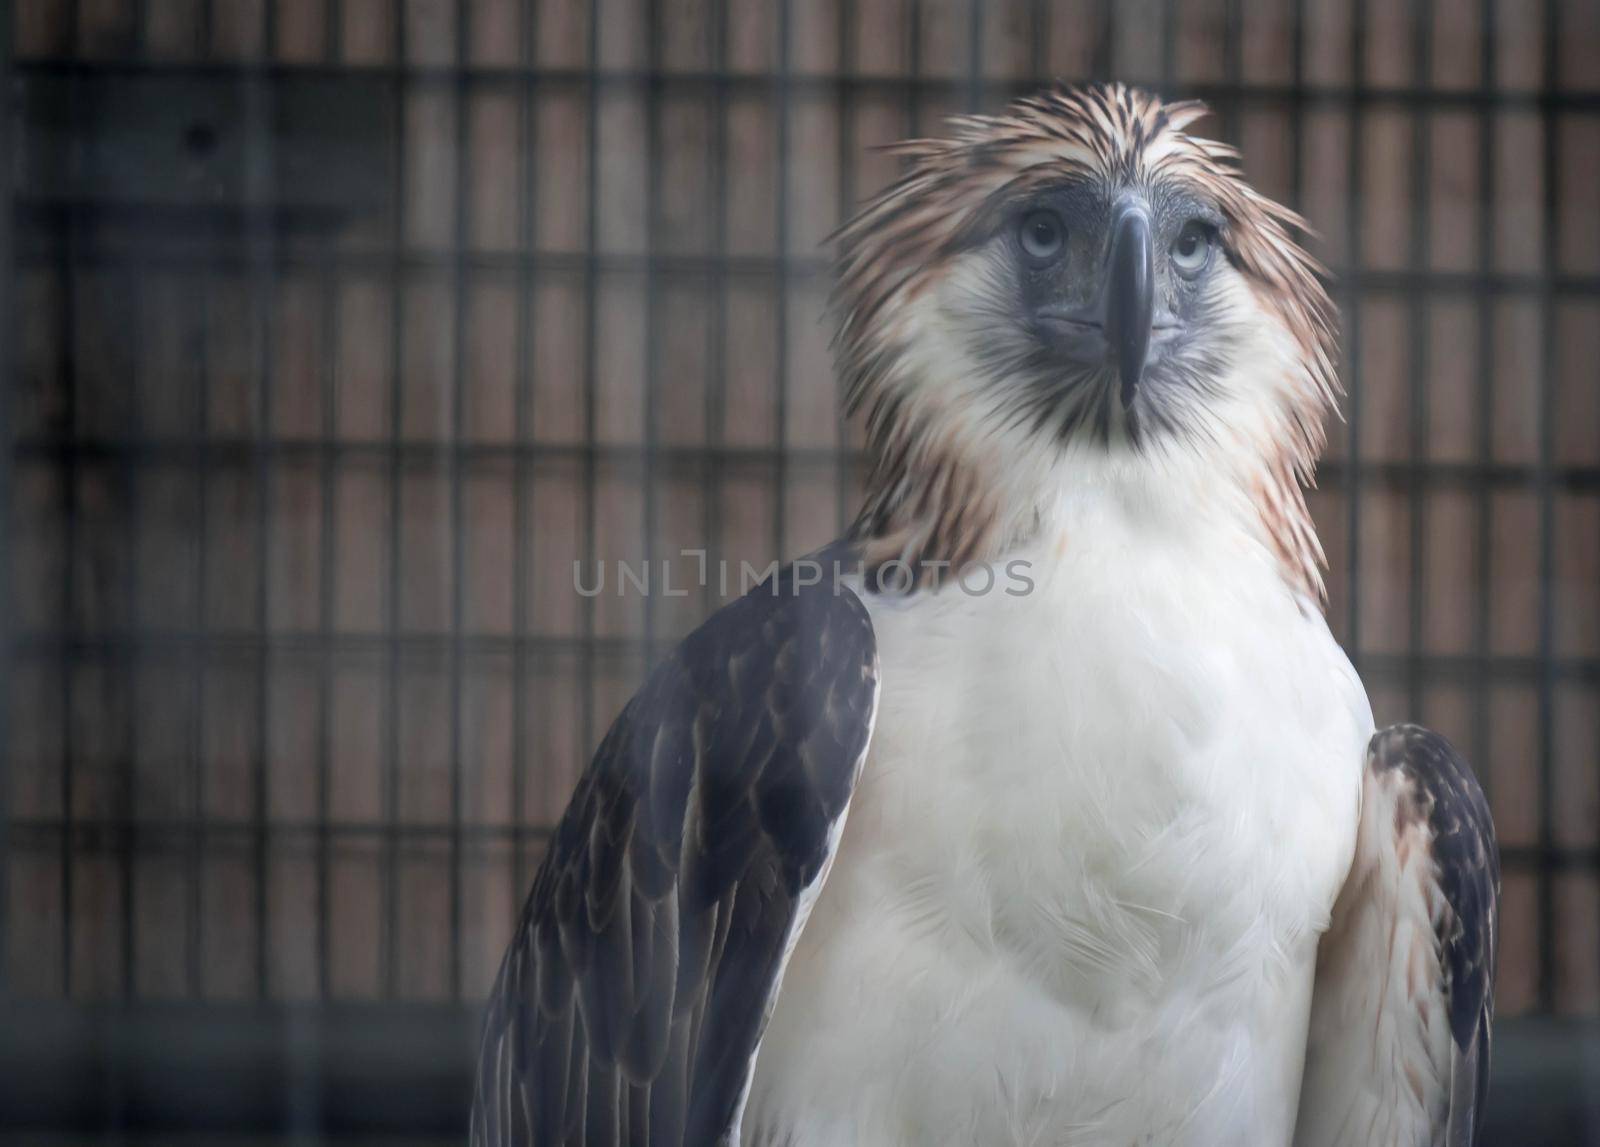 The Philippine eagle (Pithecophaga jefferyi) is one of the most endangered bird species in the world. It is believed that less than 500 pairs survive in the world